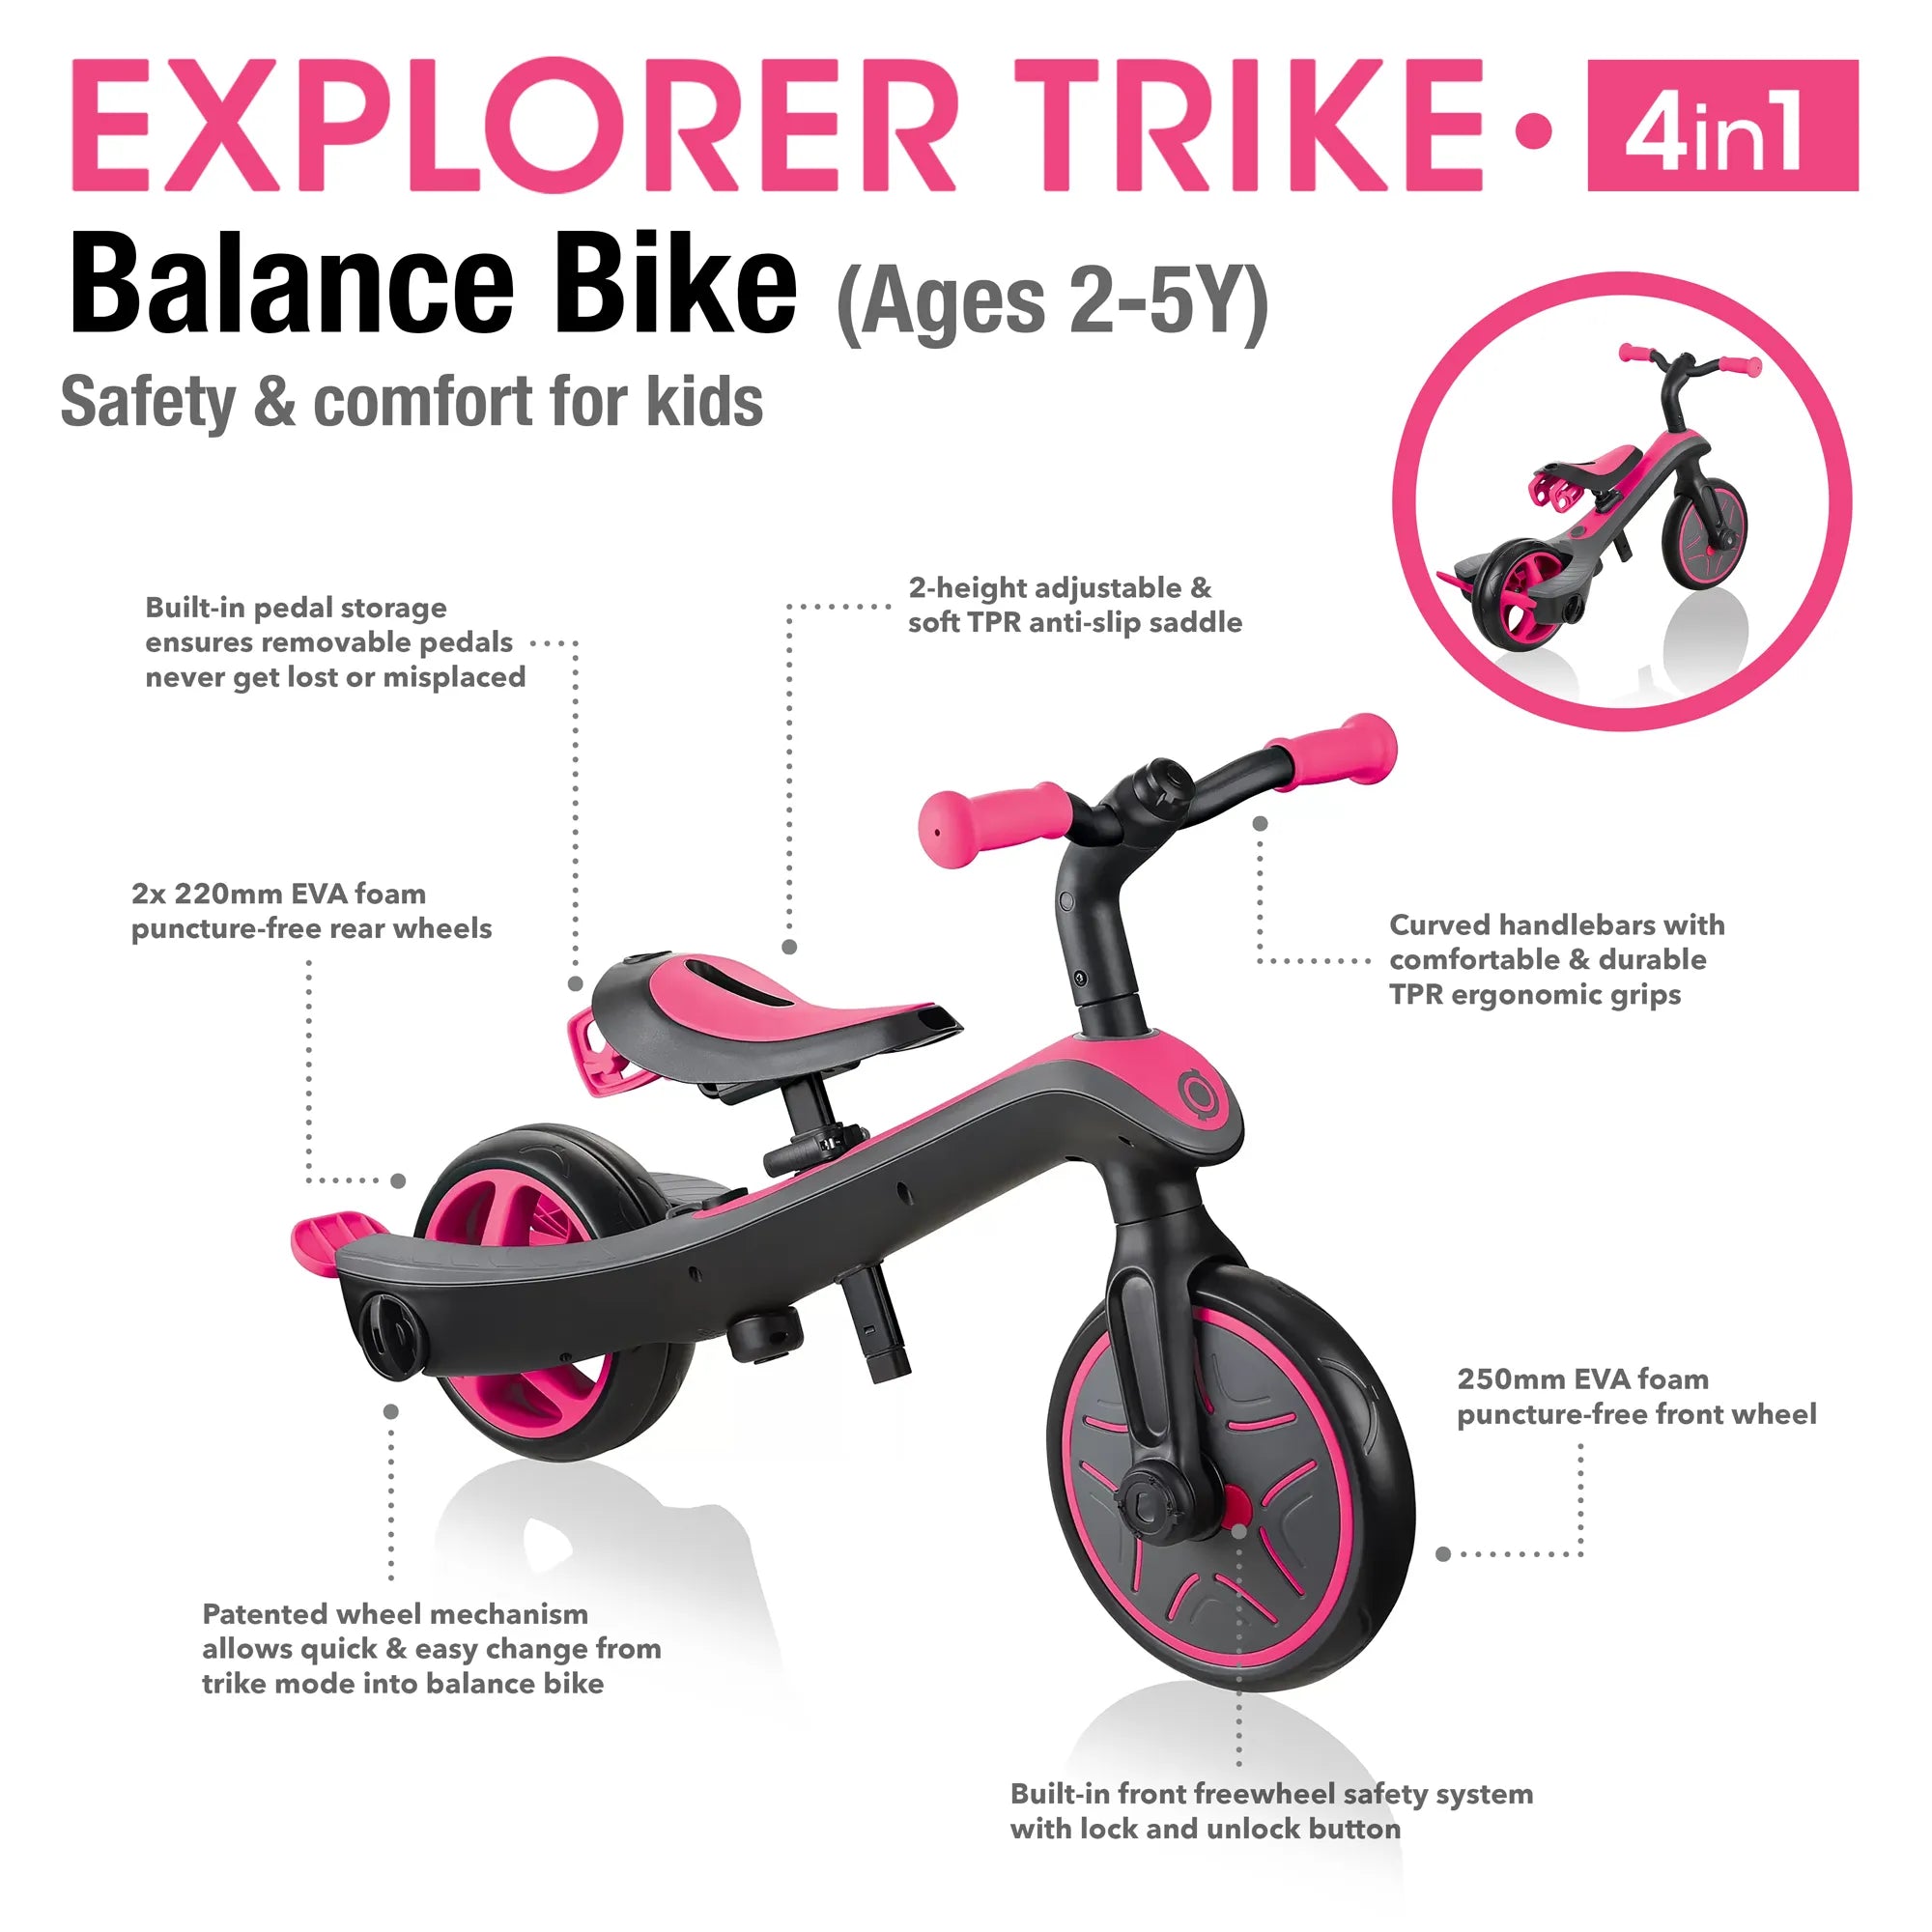 Globber Explorer Trike 4 in 1, Fuschia Pink, Balance Bike Mode, Front and Rear Views, with Features, Browns Hobby & Game.